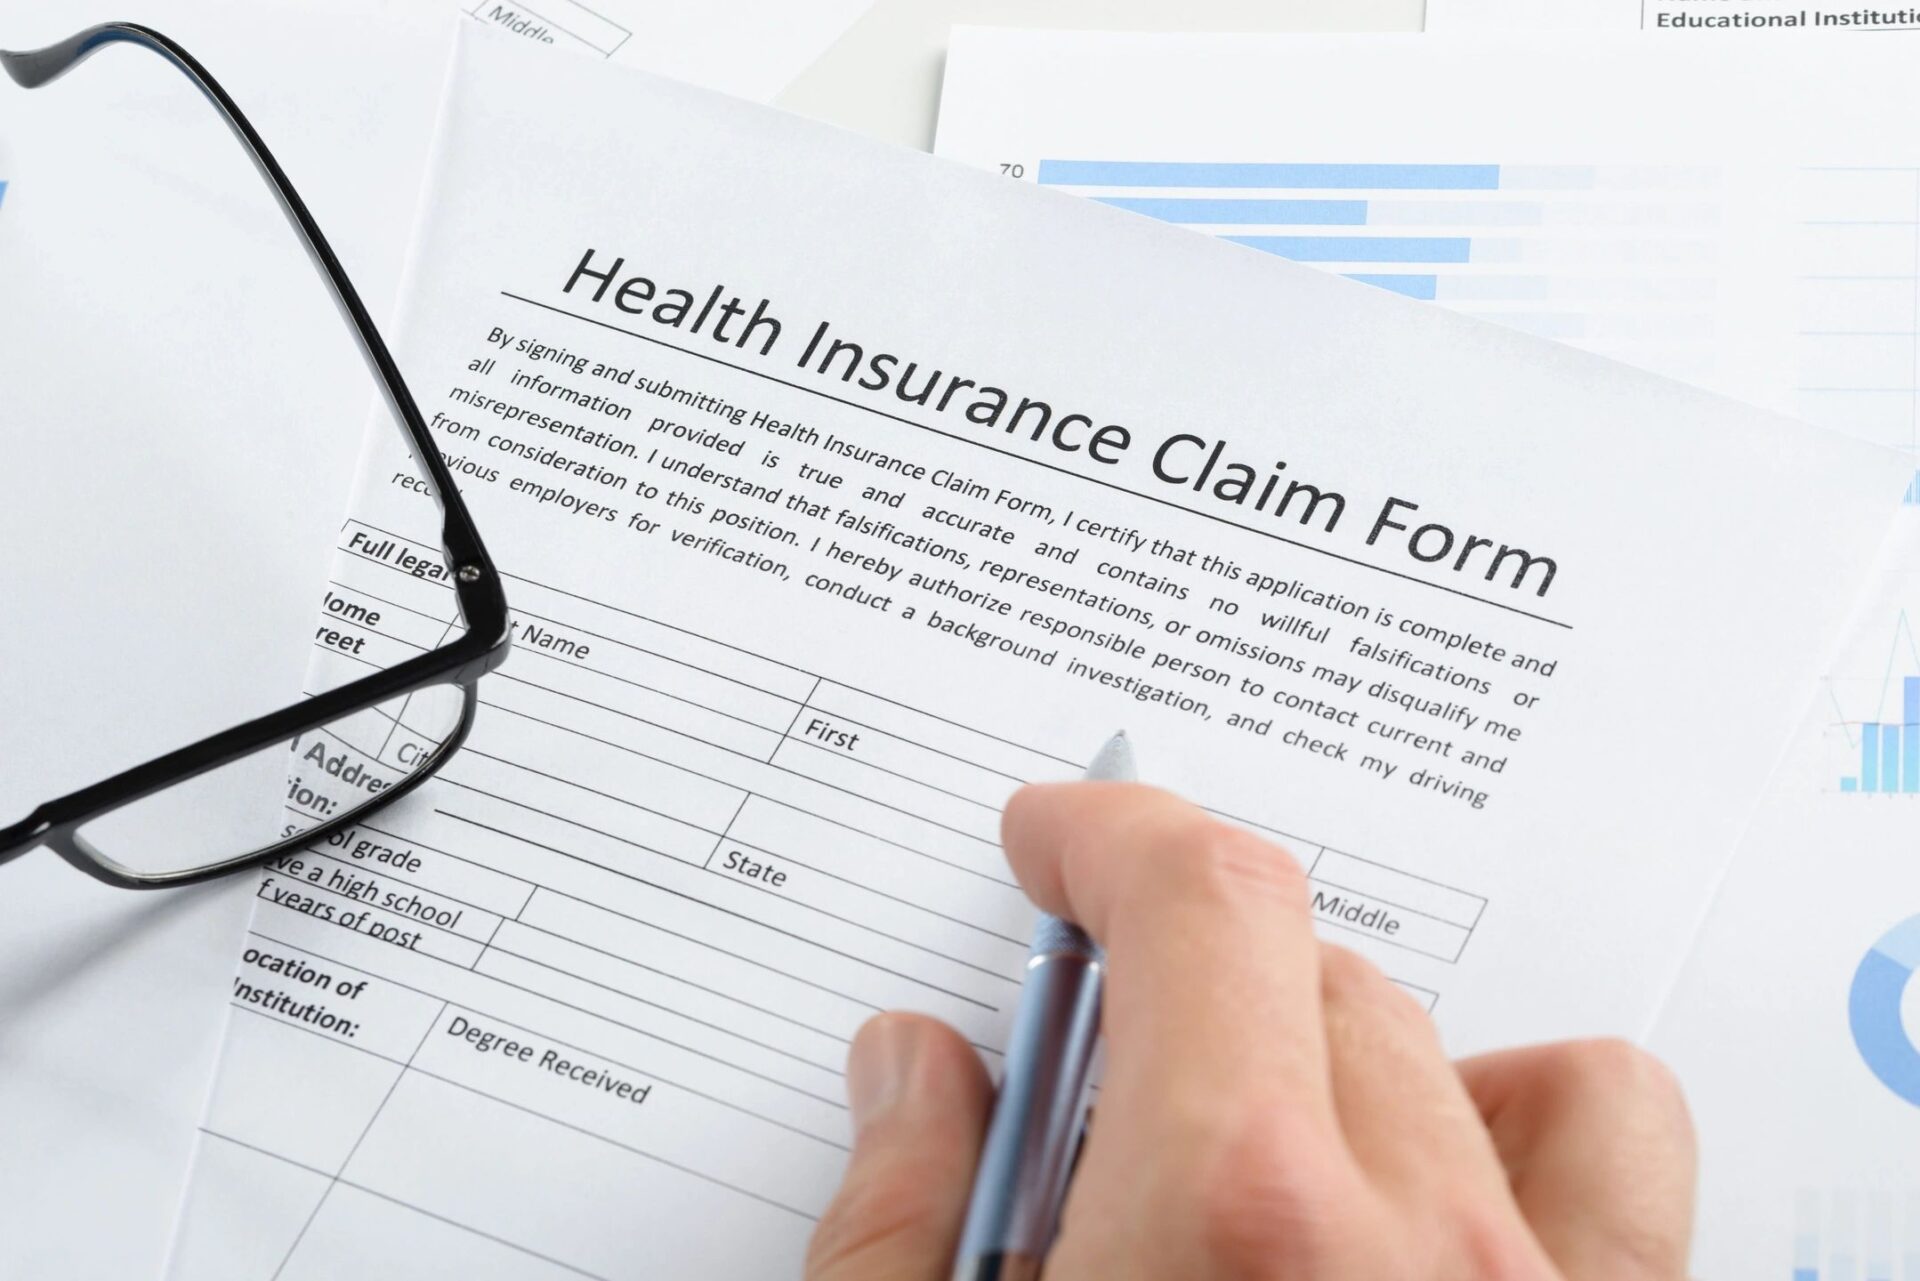 Close-up Of Hand Holding Pen Over Health Insurance Claim Application Form